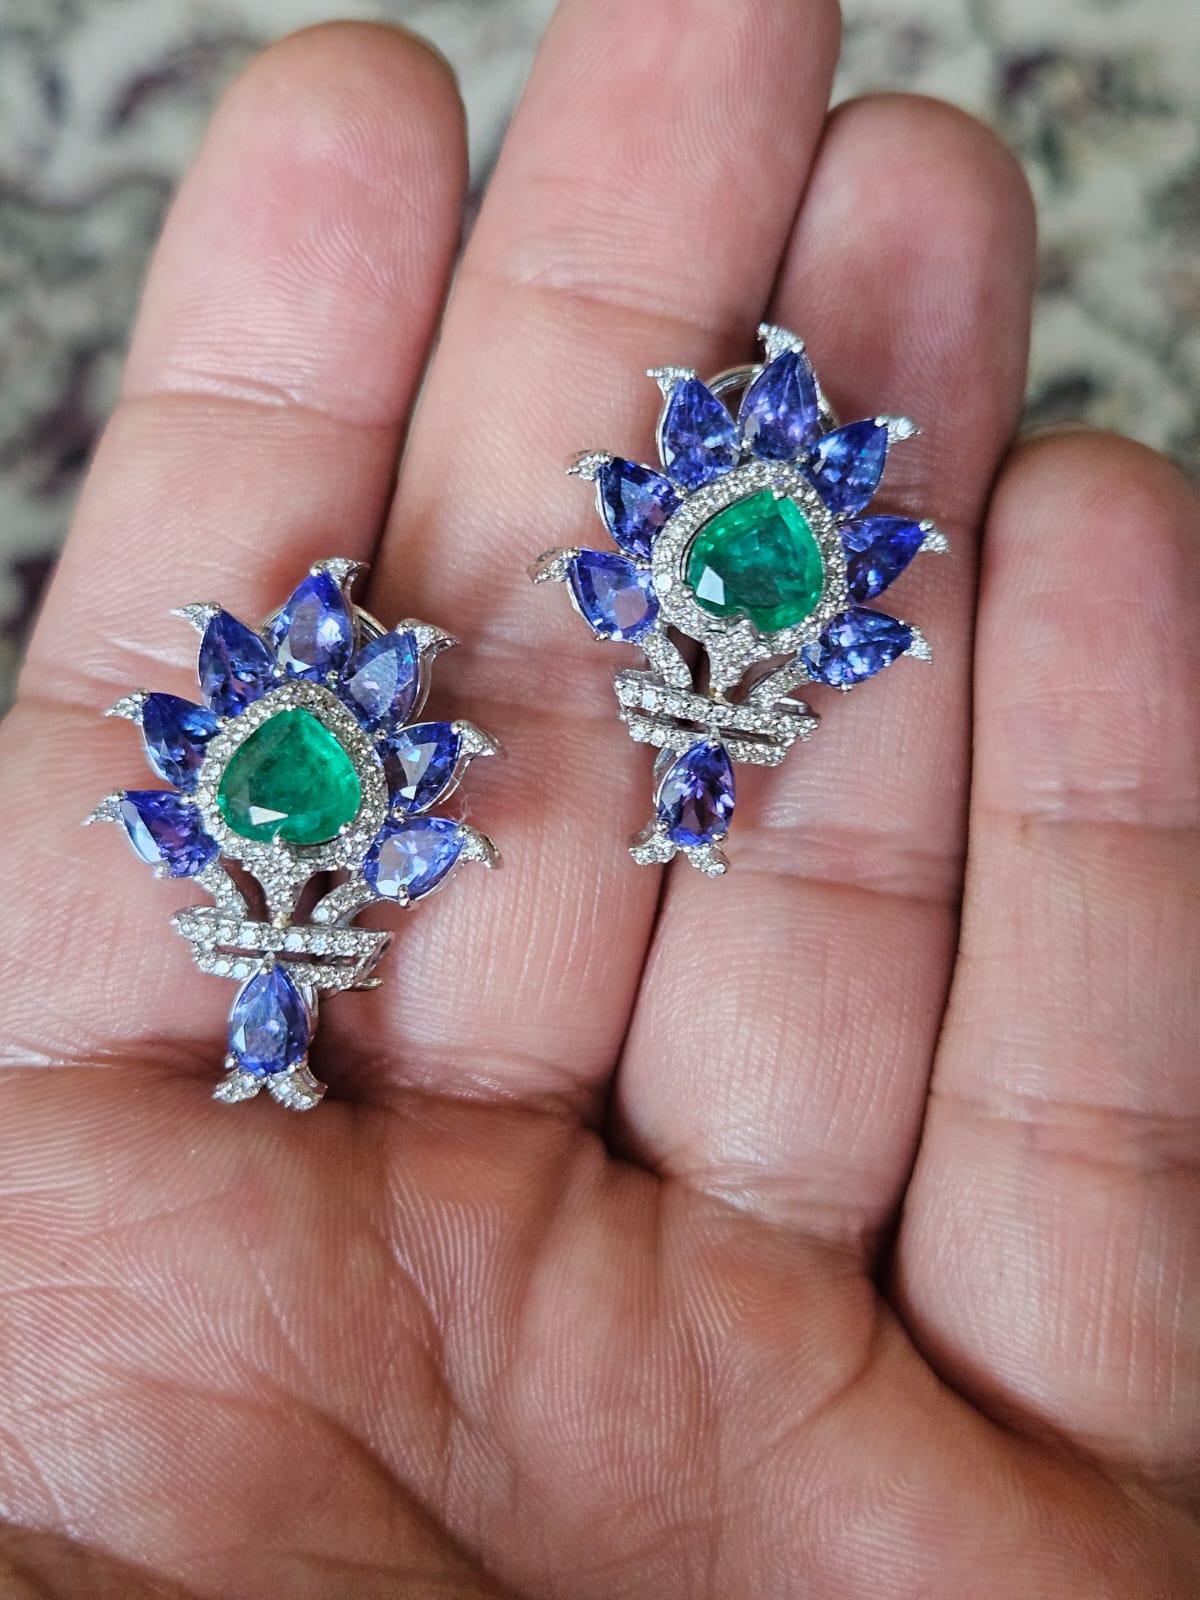 A very gorgeous and one of a kind, modern style, Tanzanite & Emerald Stud Earrings set in 18K White Gold & Diamonds. The weight of the Tanzanites is 6.76 carats. The Tanzanites are responsibly sourced from Tanzania. The weight of the Emeralds is